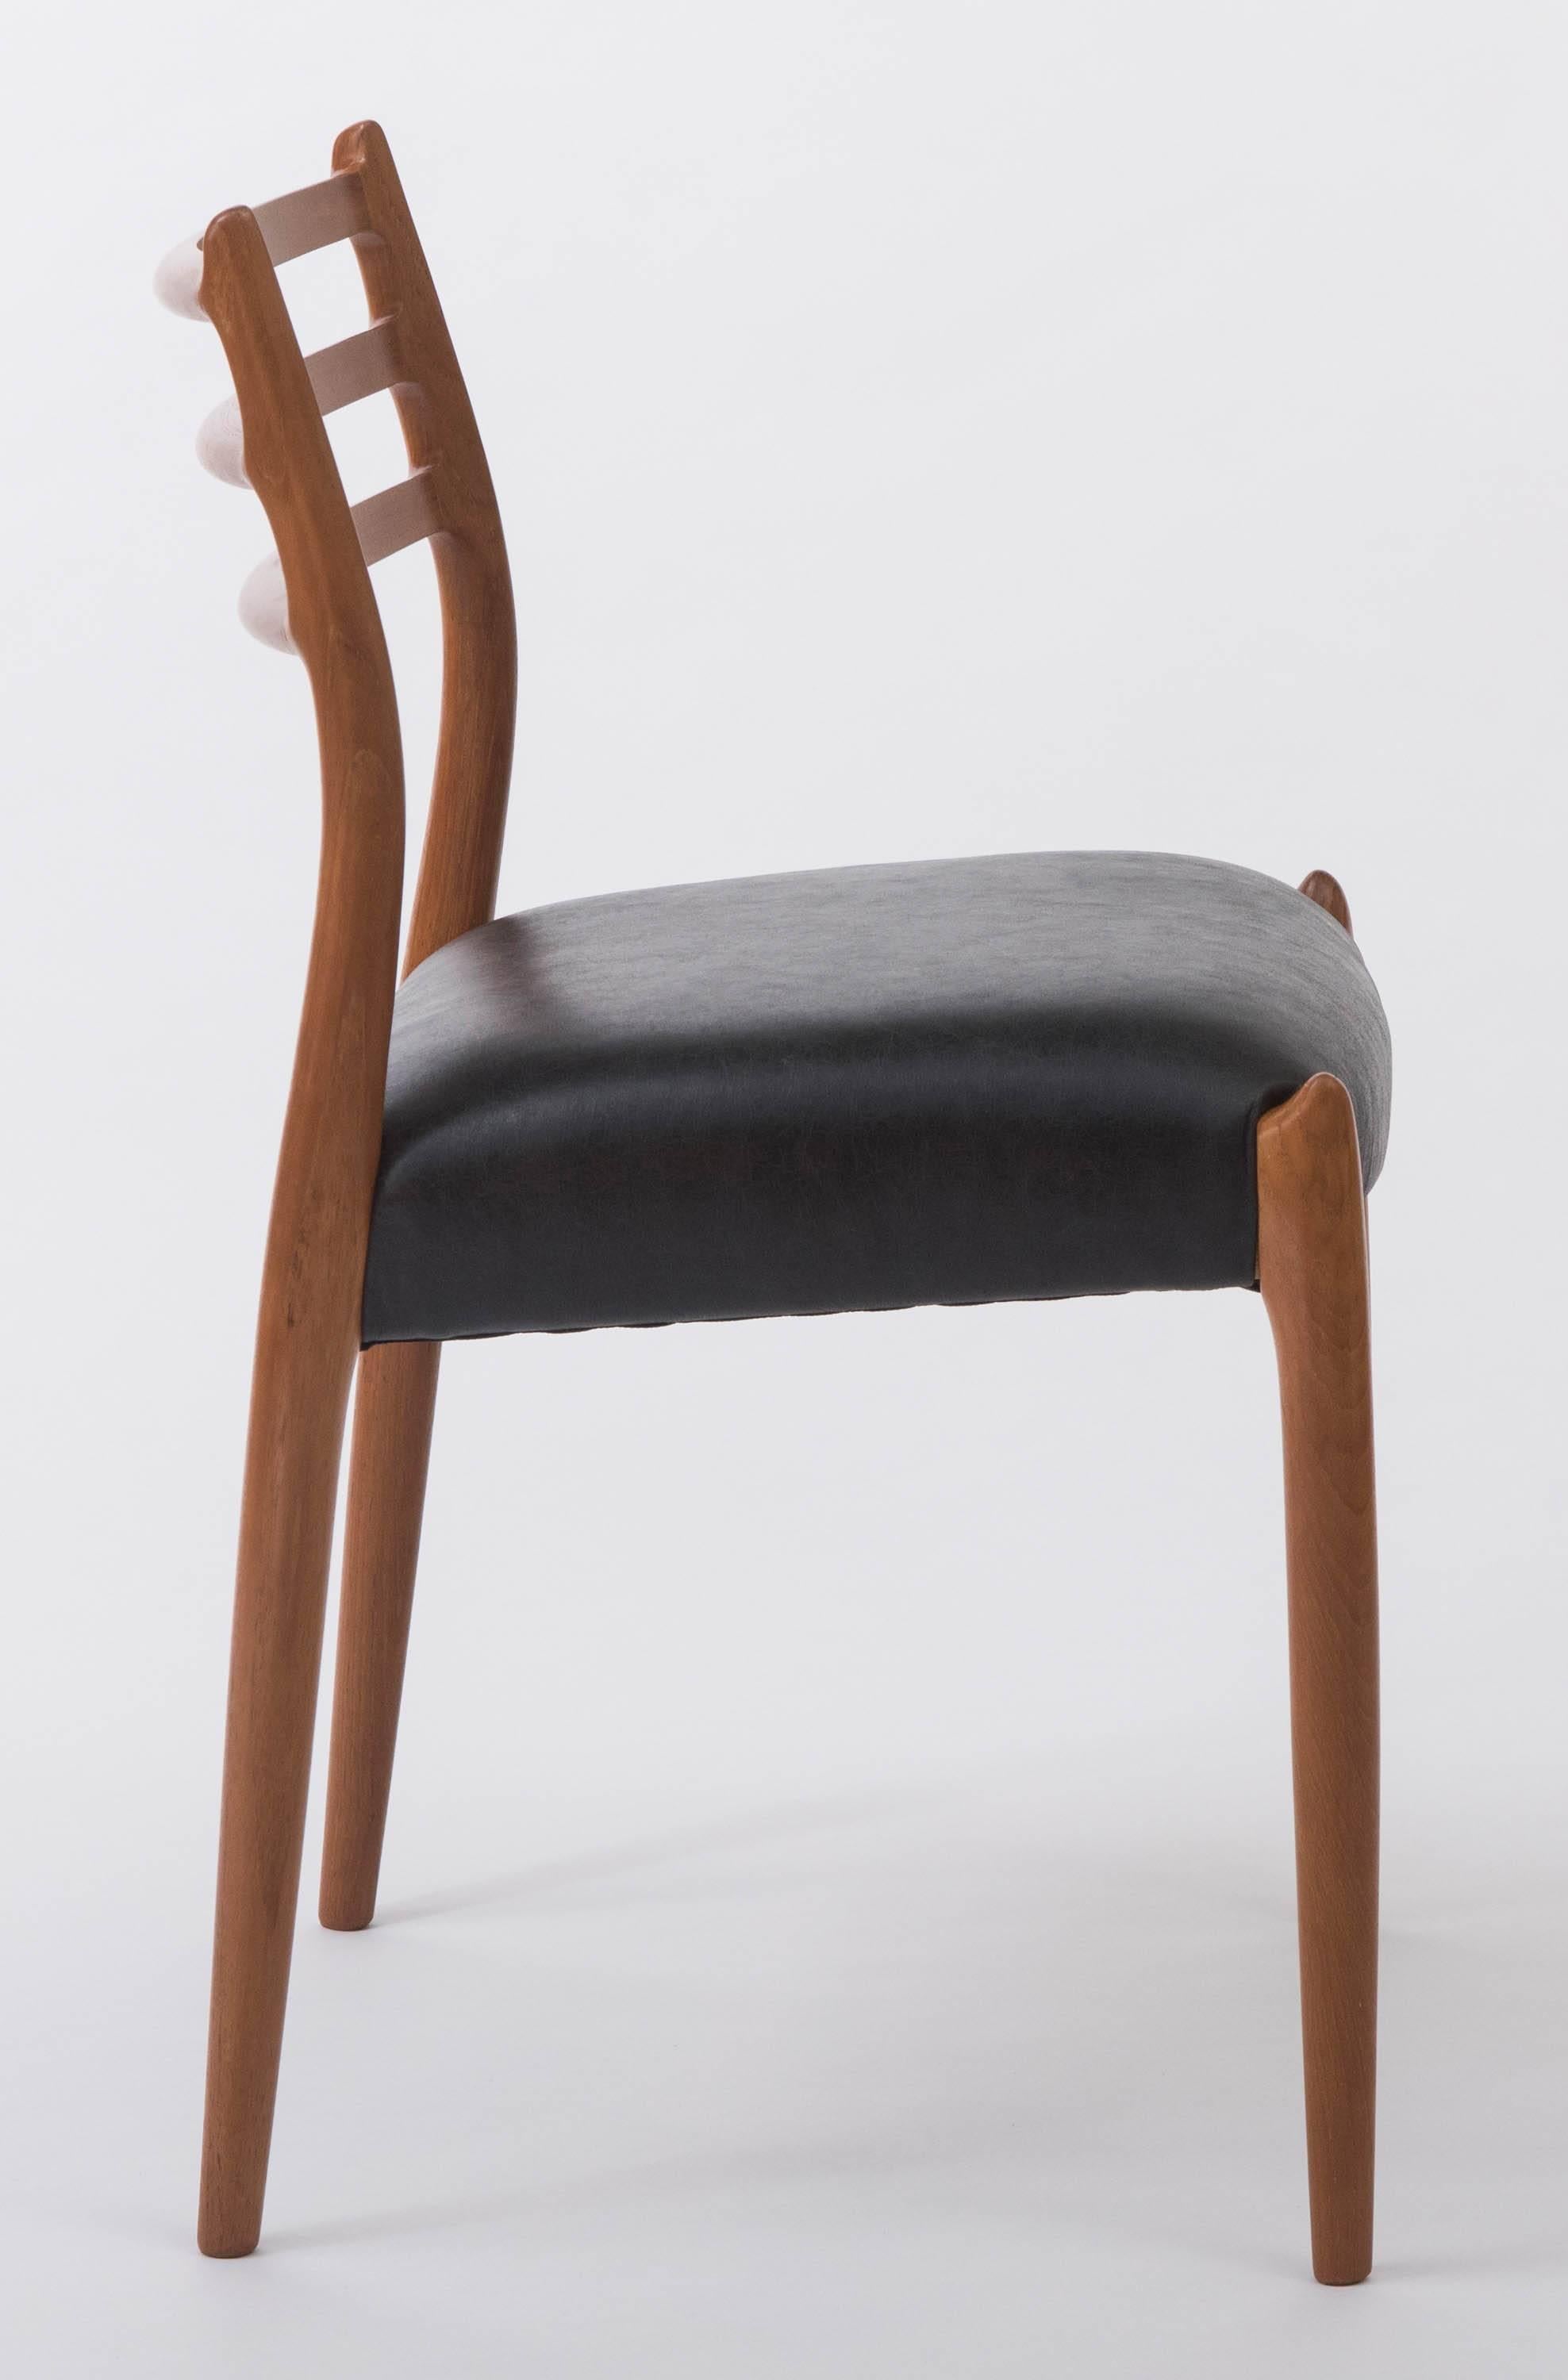 Niels Møller set of eight teak dining chairs with black leather seats, designed for Møllers Mobelfabrik
Model 62/78
Denmark, circa 1960
Measures: Height 80 cm (seat height 45 cm) wide 49 cm and 43 cm deep.
  